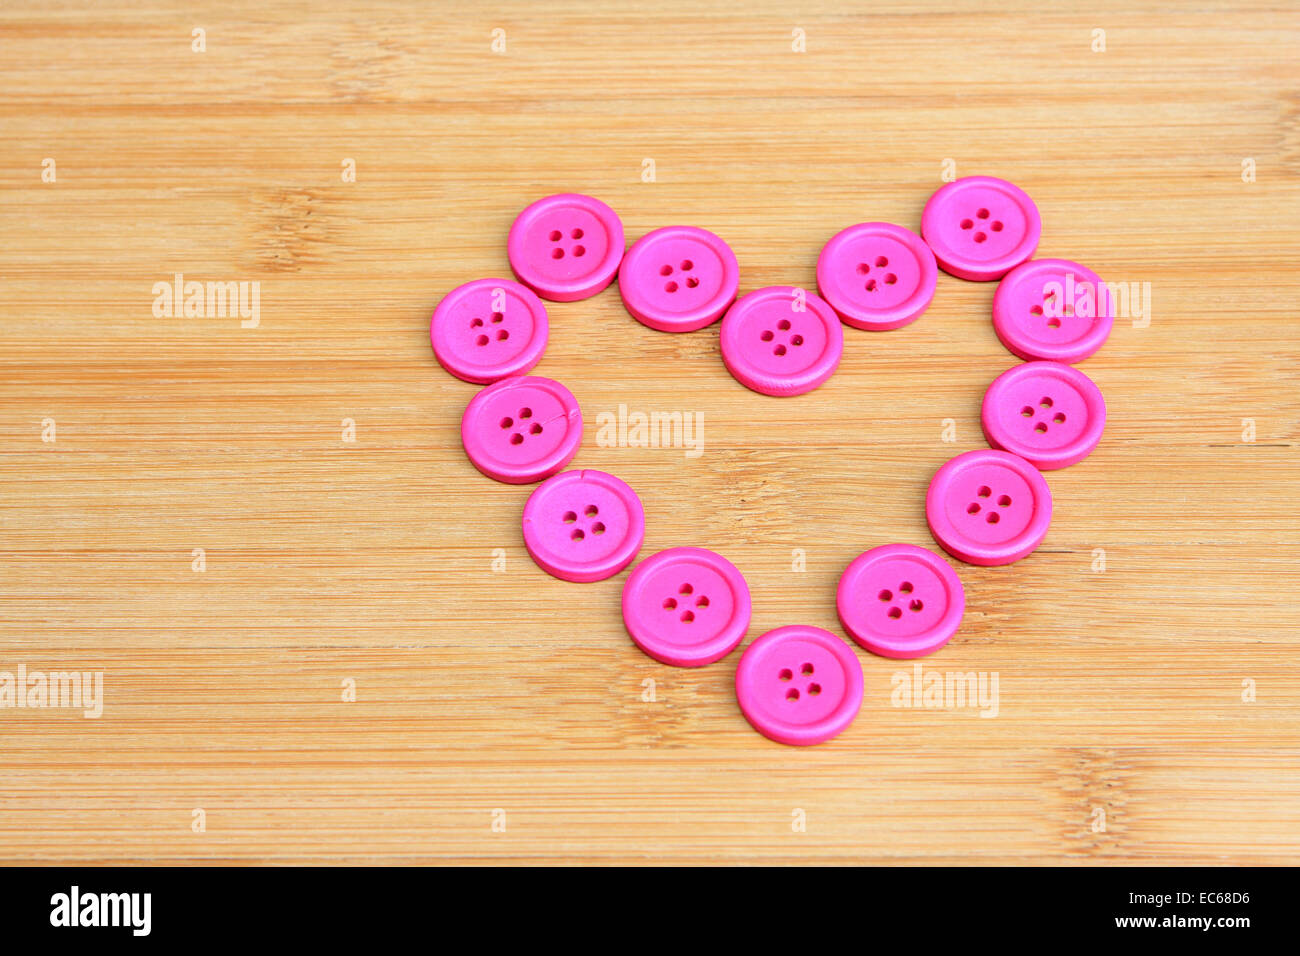 Two heart shaped buttons Stock Photo by ©koosen 35647685